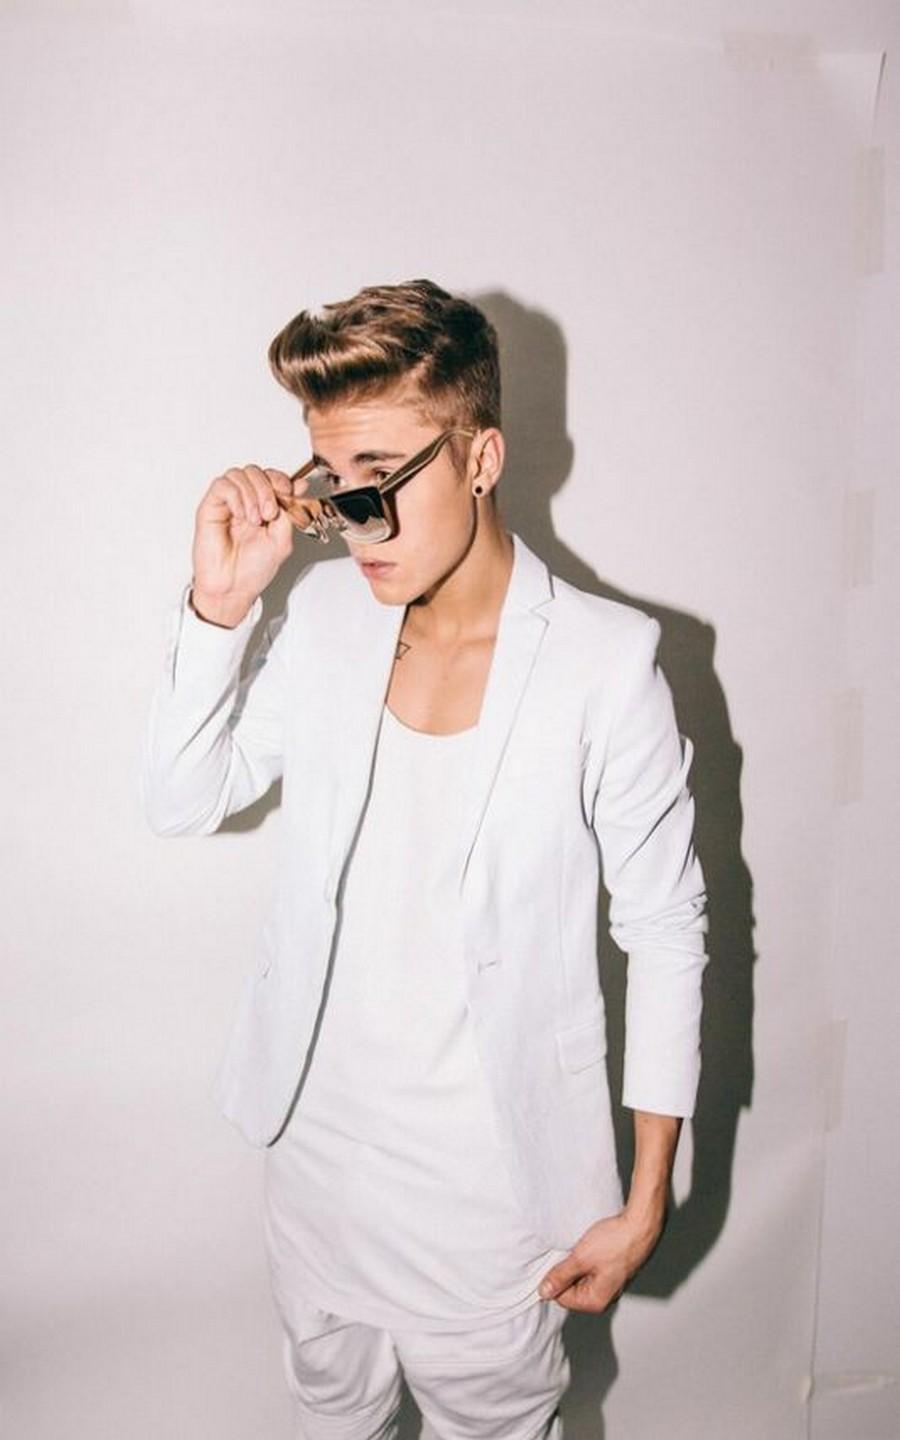 Justin Bieber Wallpapers 4k For Android Apk Download